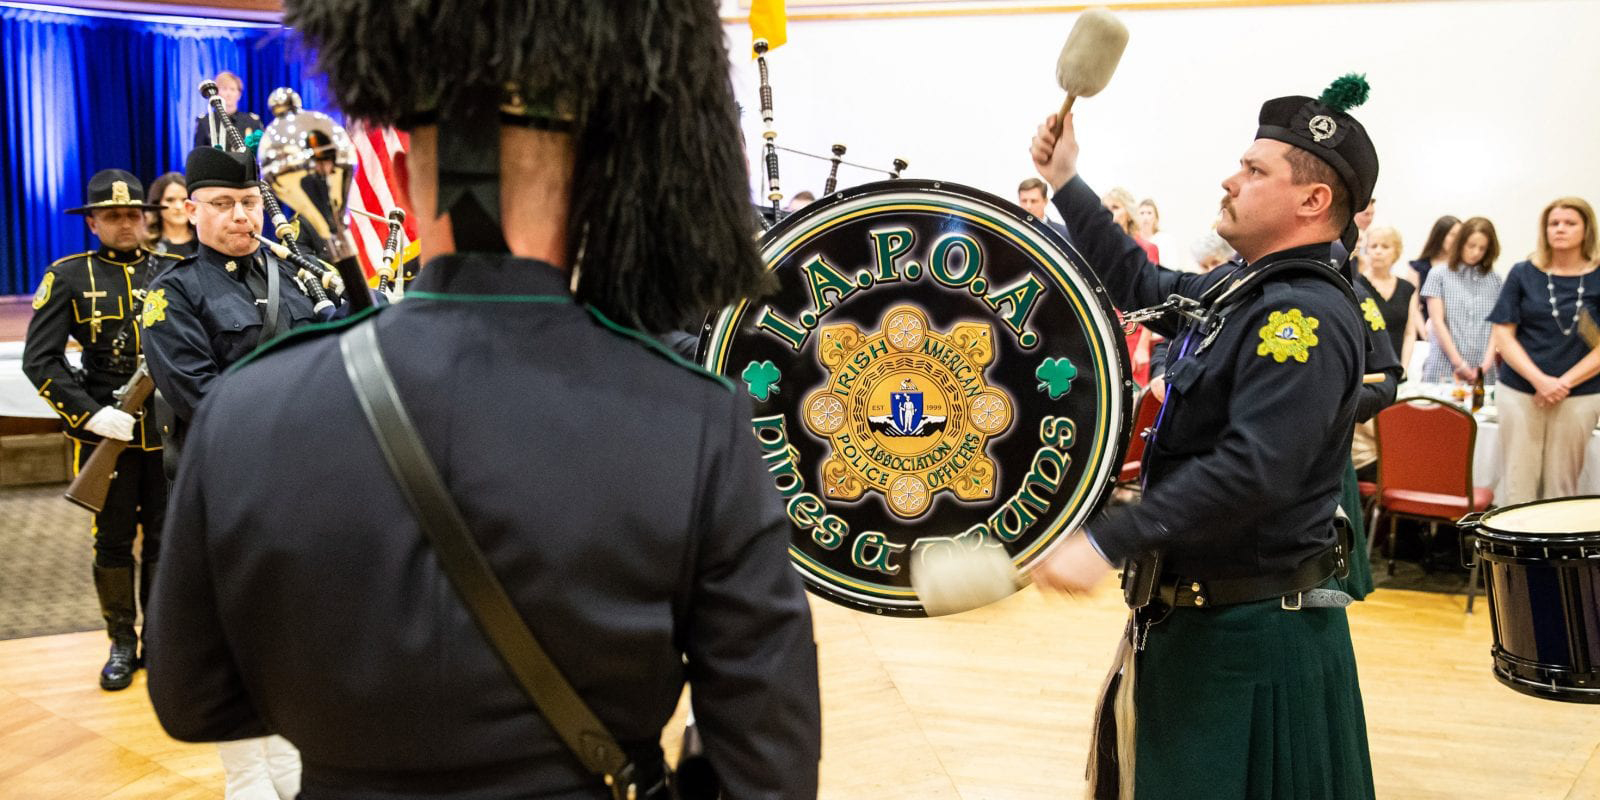 Irish American POlice officers association marching band